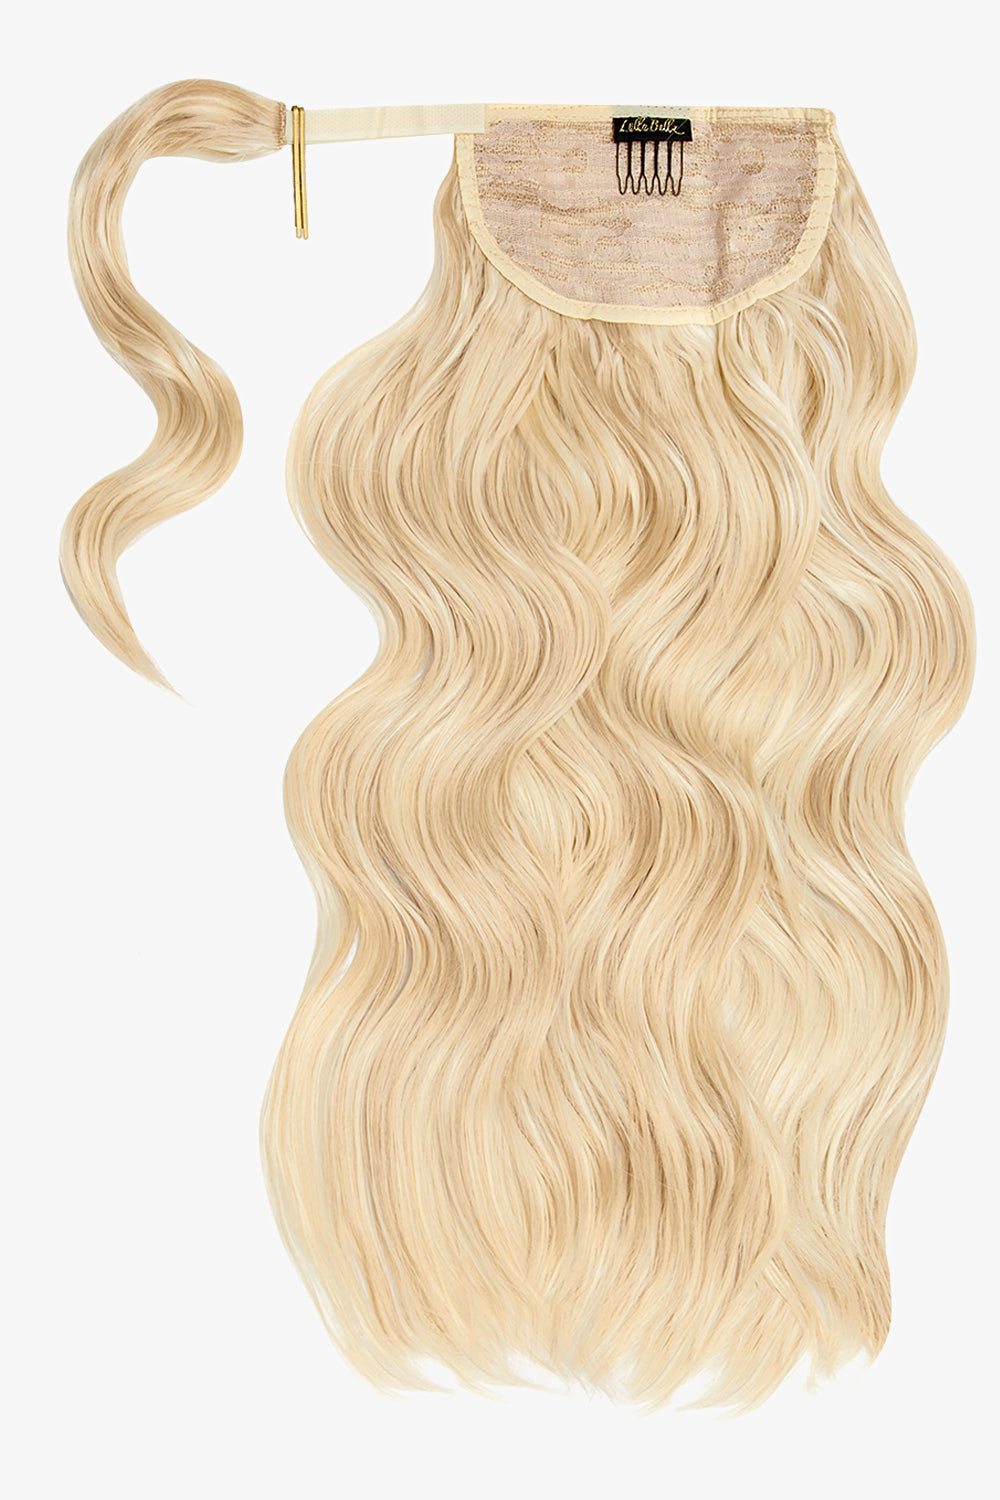 Midi Grande Brushed Out Wave 22’’ Wraparound Pony - Highlighted Champagne